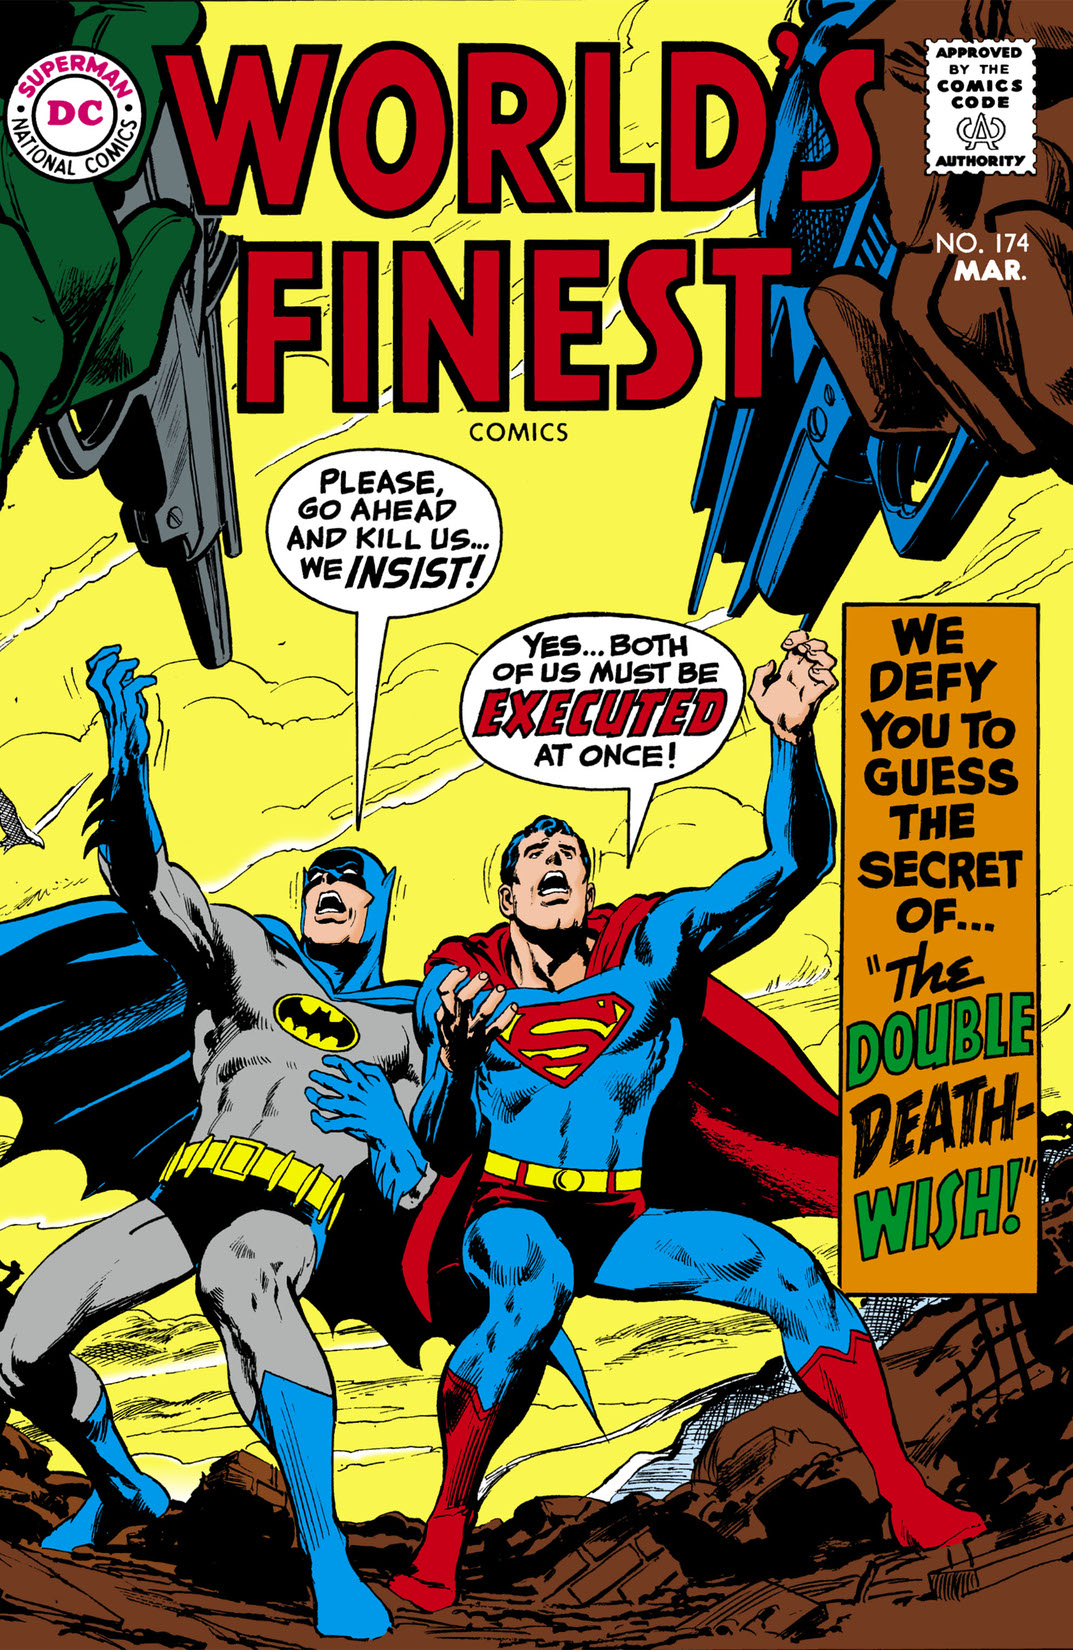 World's Finest Comics (1941-) #174 preview images